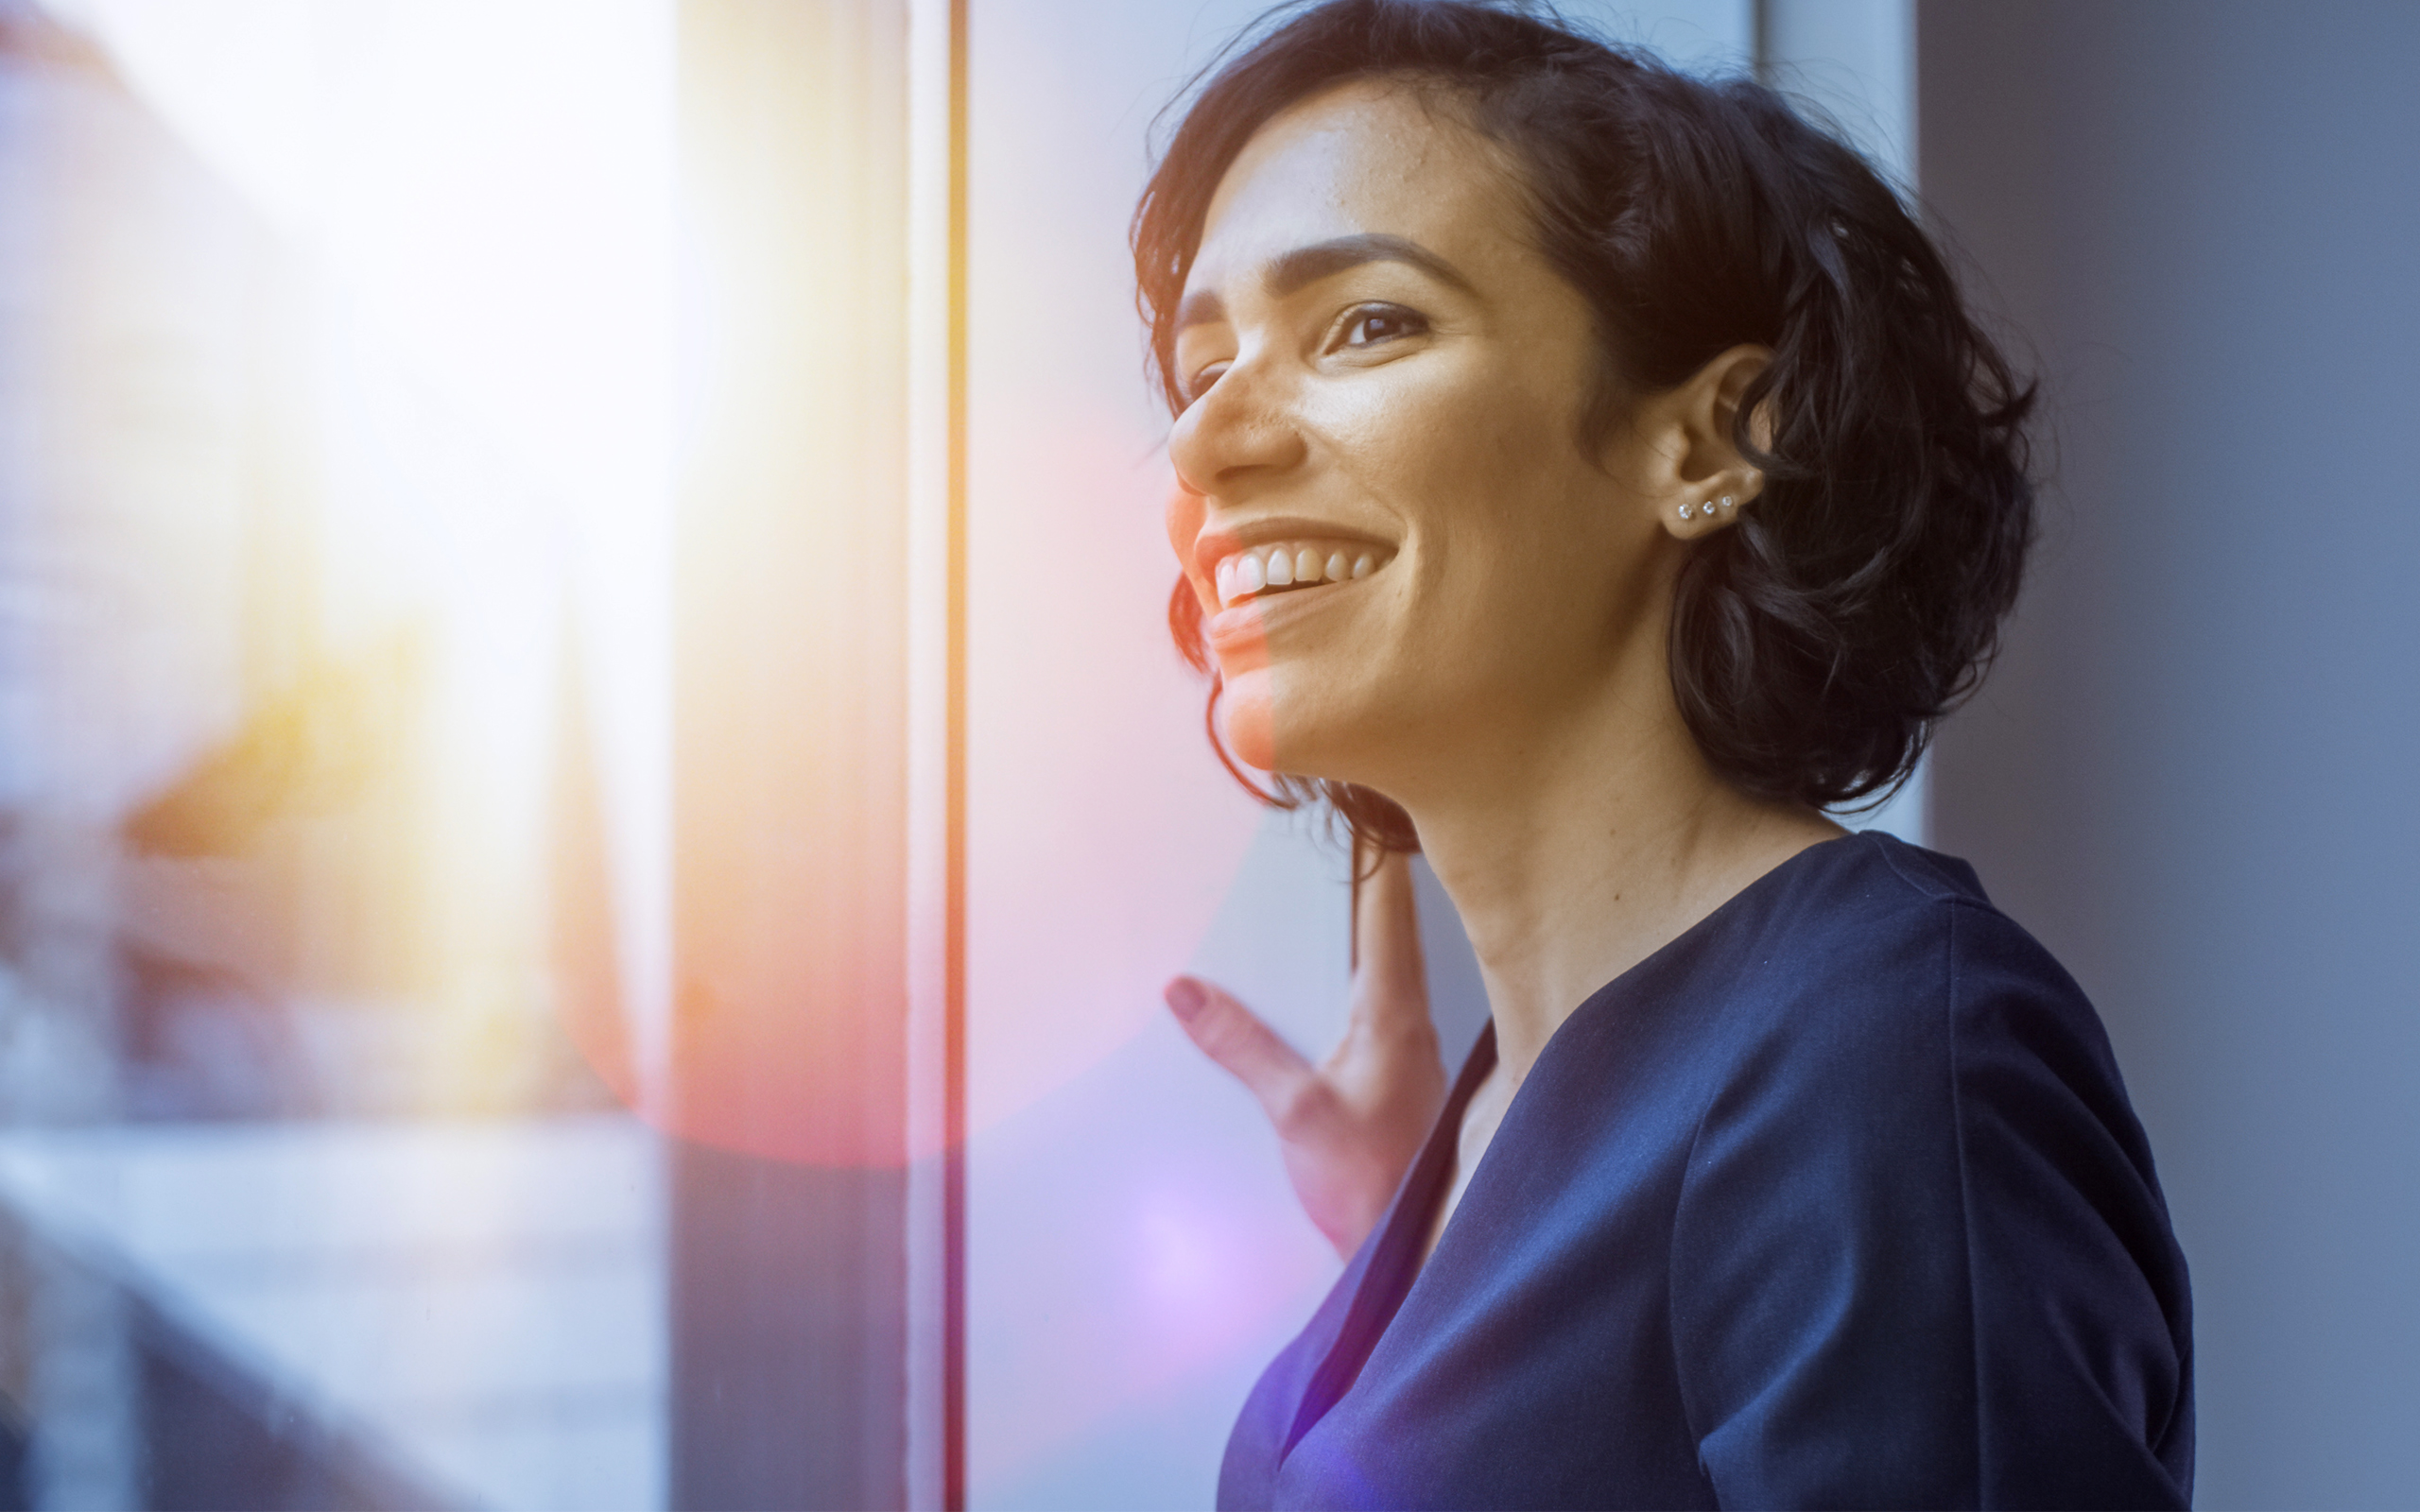 Smiling, confident woman, looking out window of office with sunlight outside